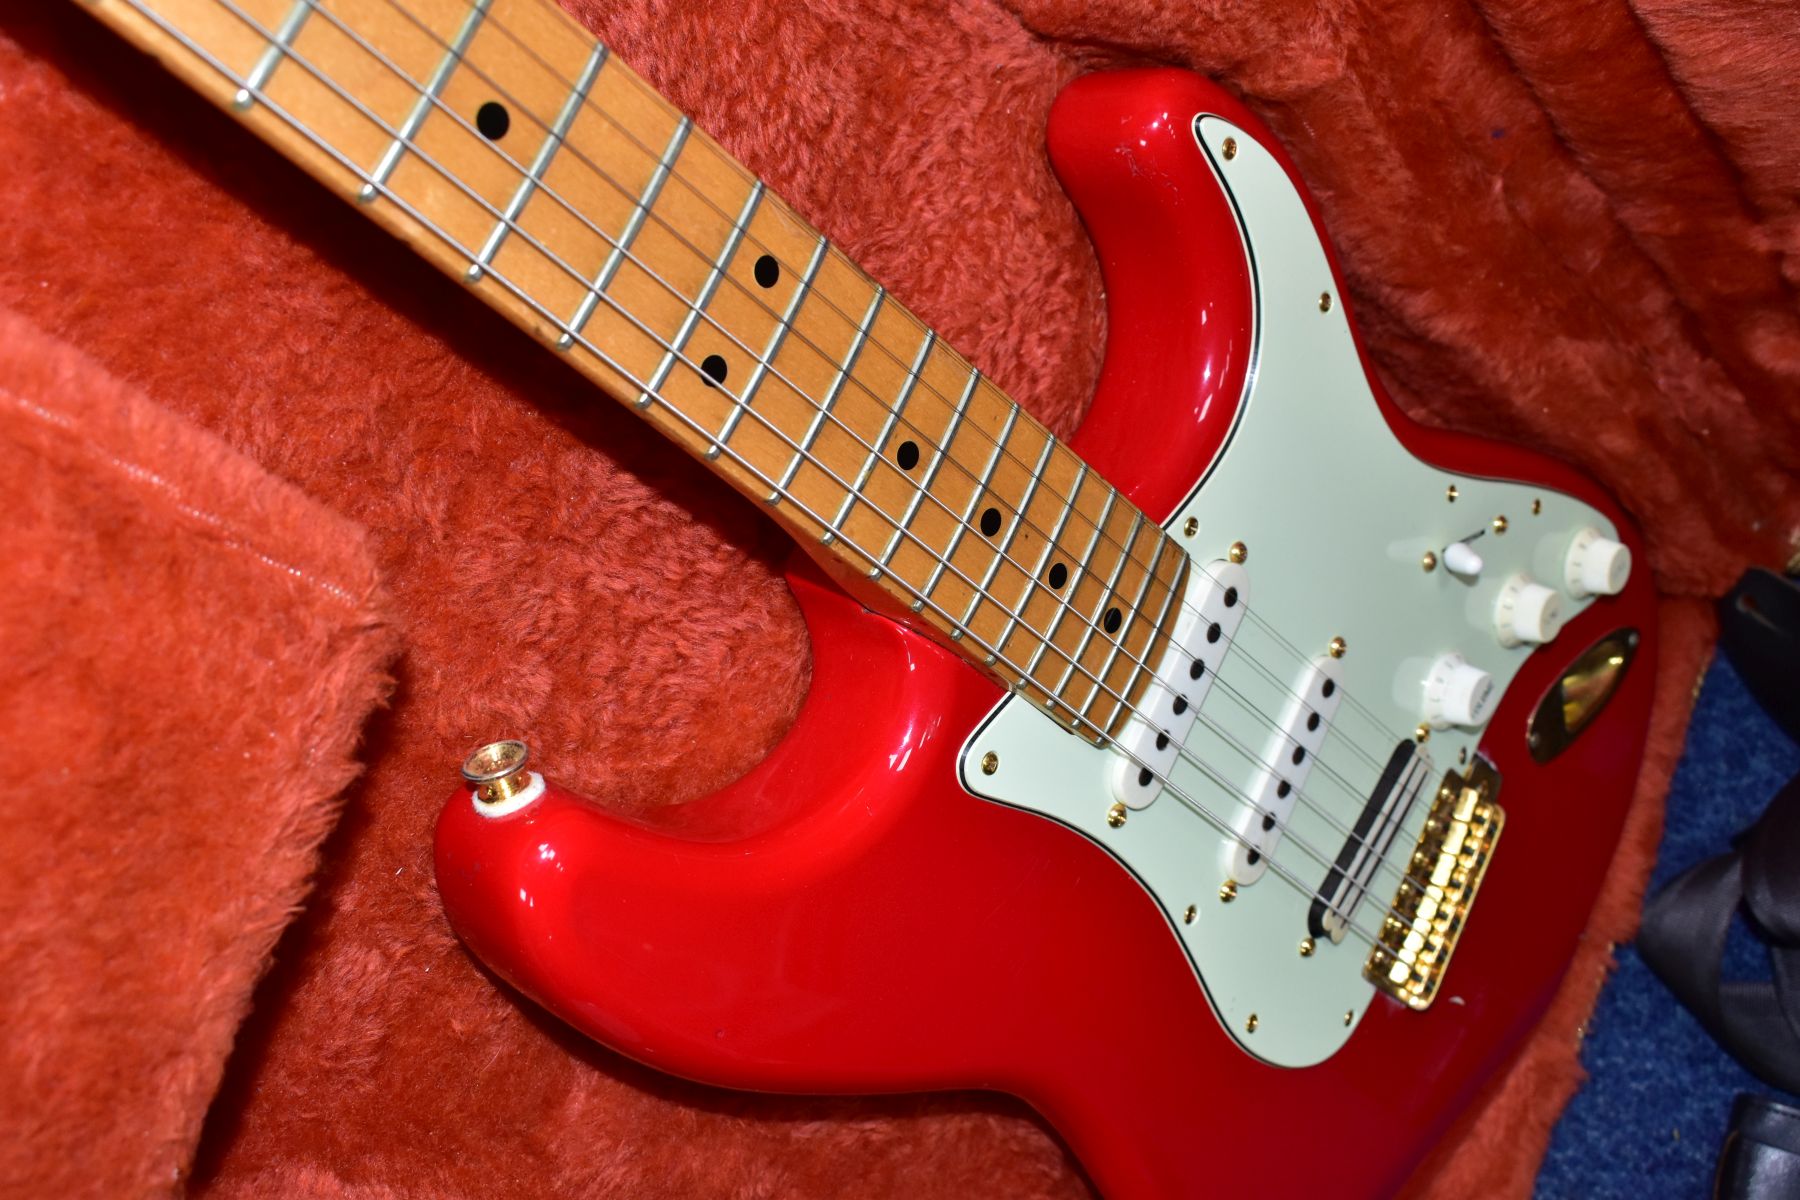 A 1984 USA FENDER STRATOCASTER GUITAR, in red with a one piece maple neck and fingerboard, gold - Image 5 of 6